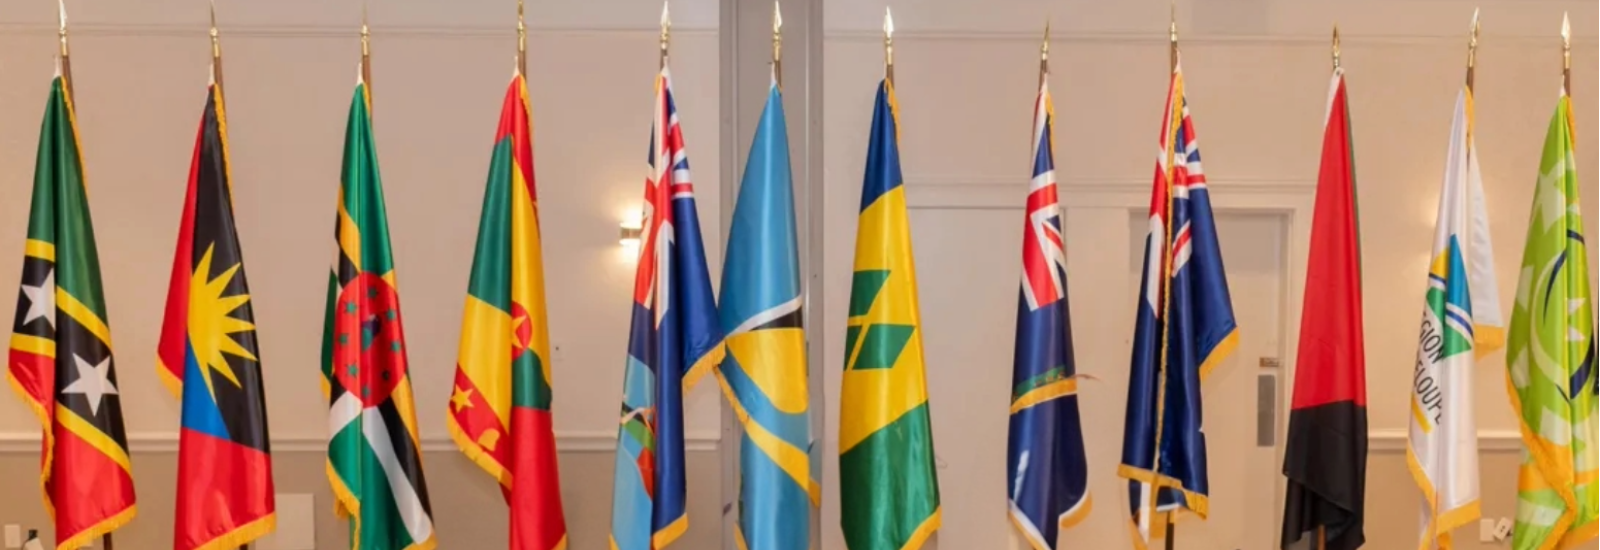 OECS Member States Flag and Countries